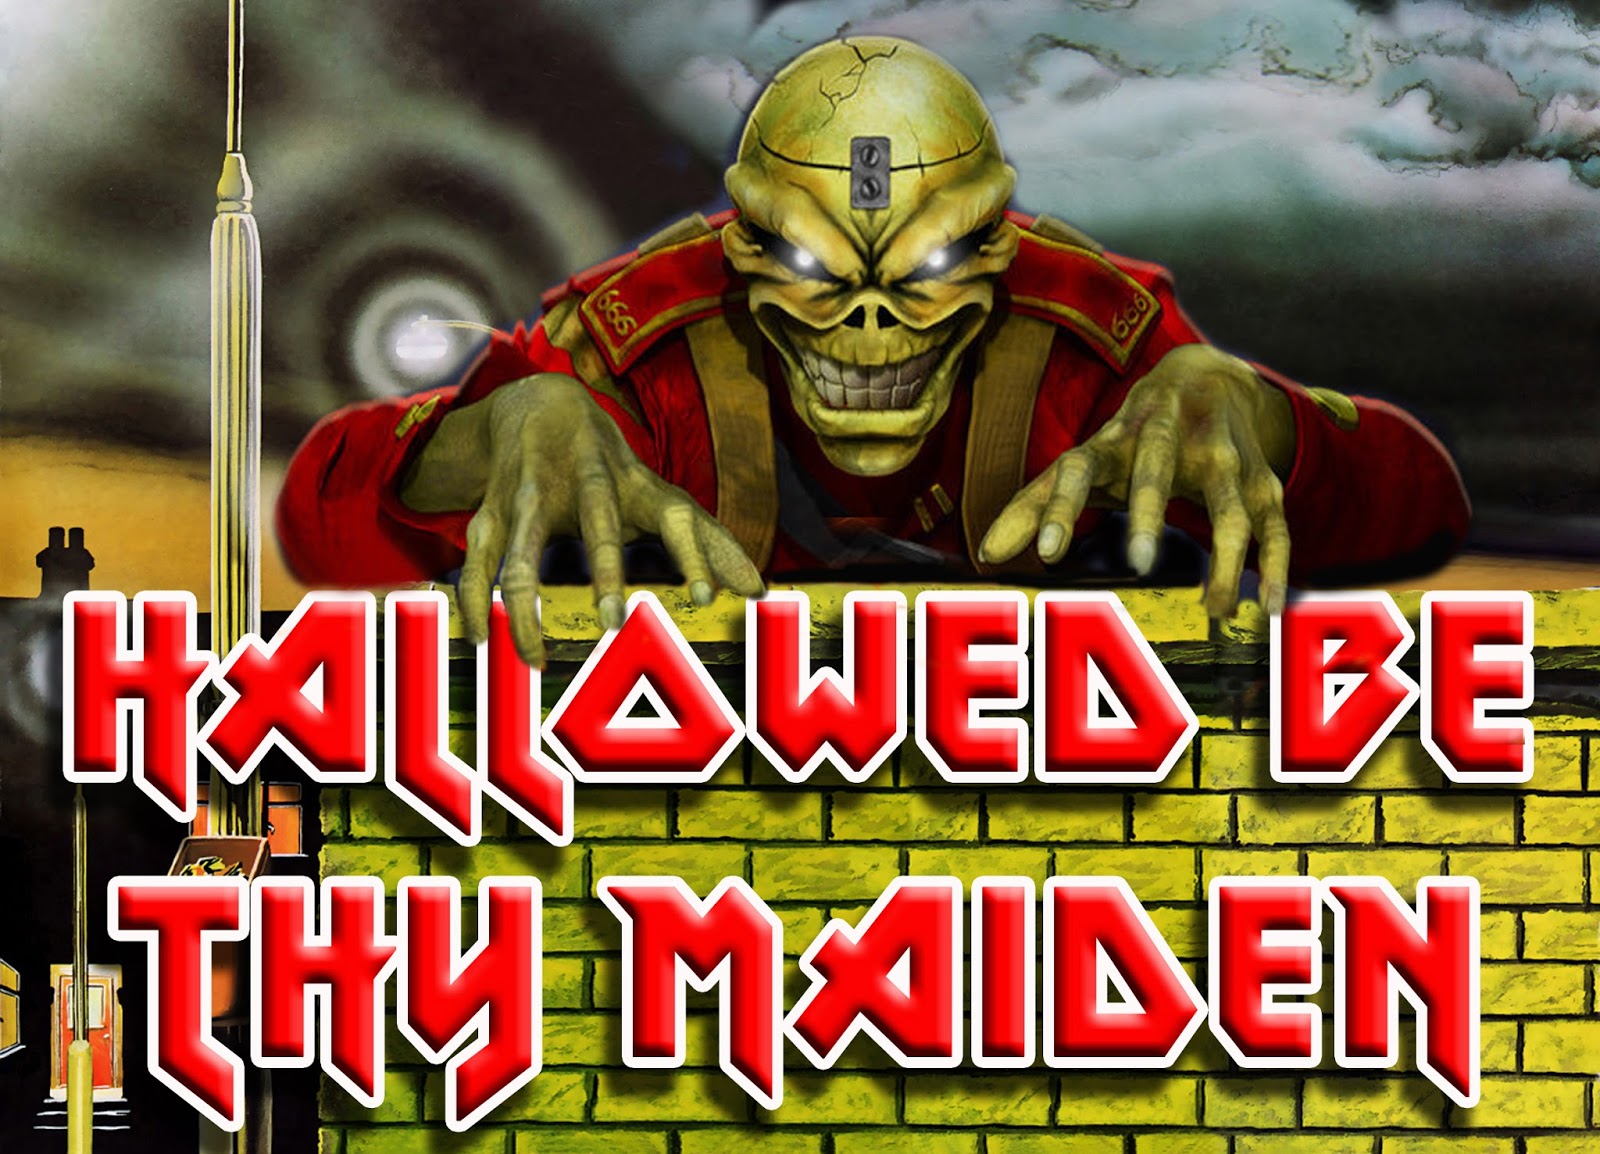 hallowed be thy name by iron maiden